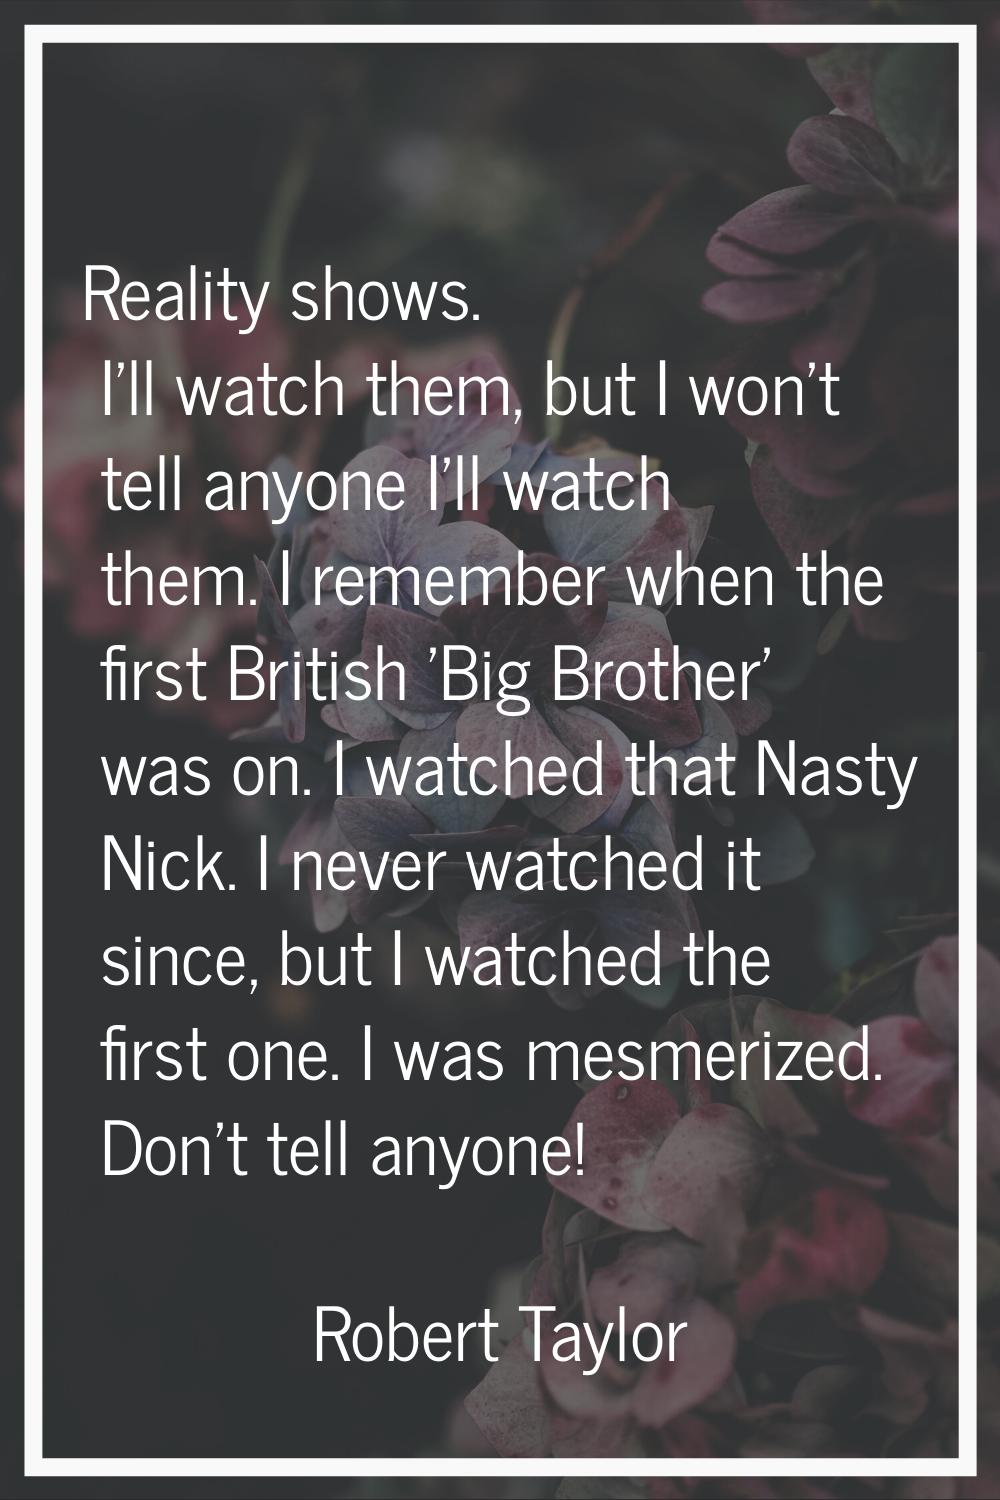 Reality shows. I'll watch them, but I won't tell anyone I'll watch them. I remember when the first 